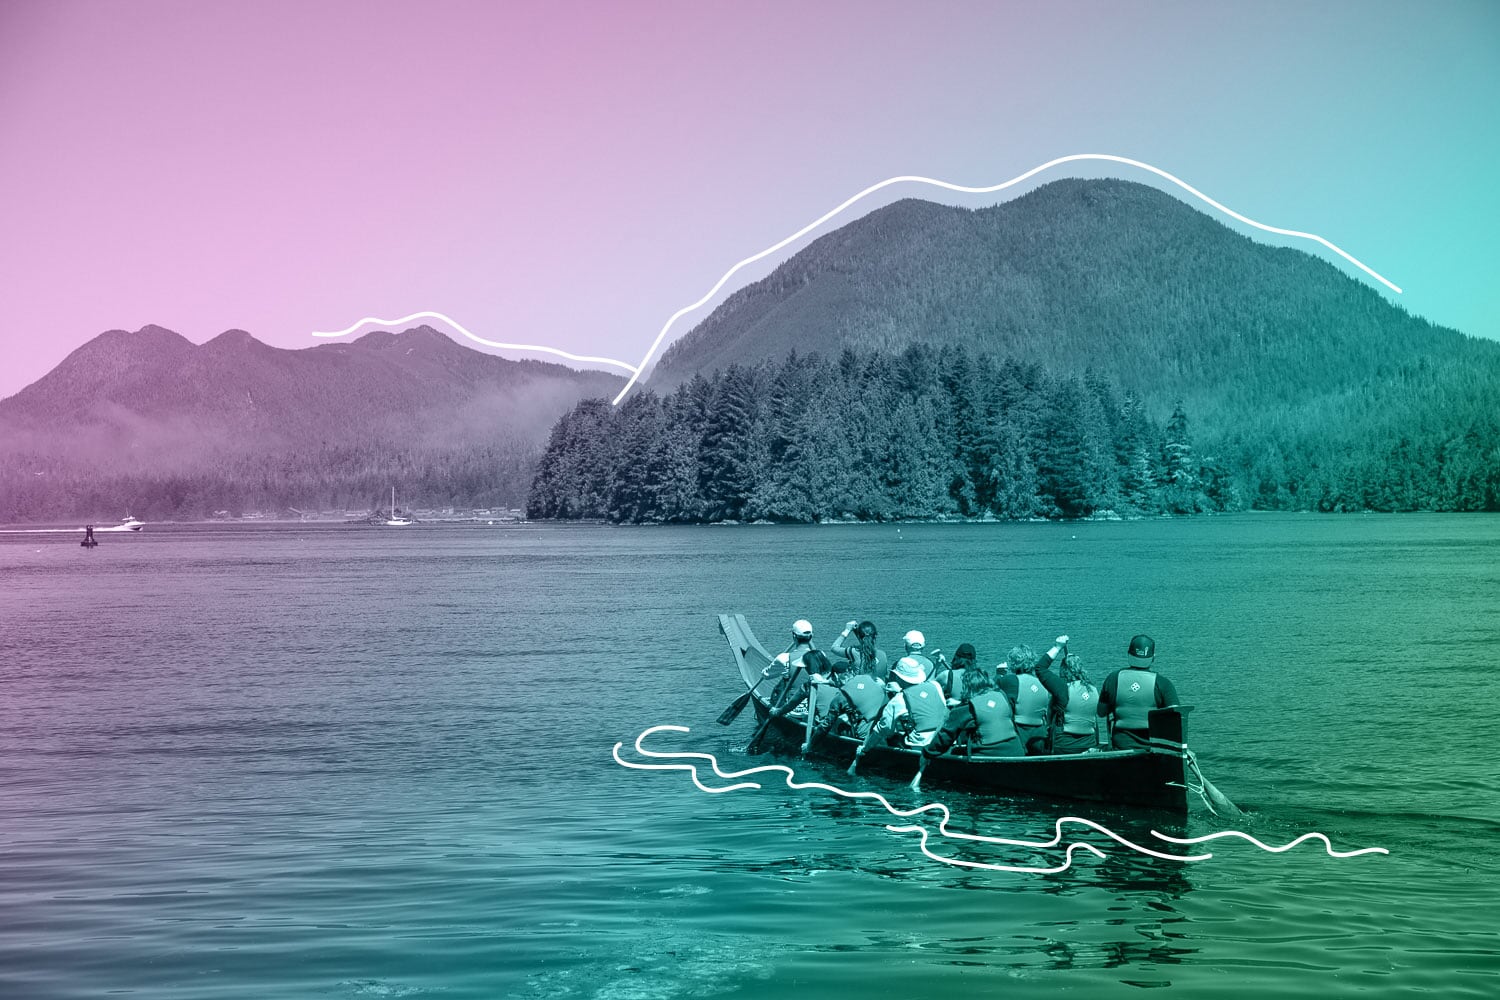 A group of people are paddling a canoe across a lake towards mountains. There is a gradient over the photograph.